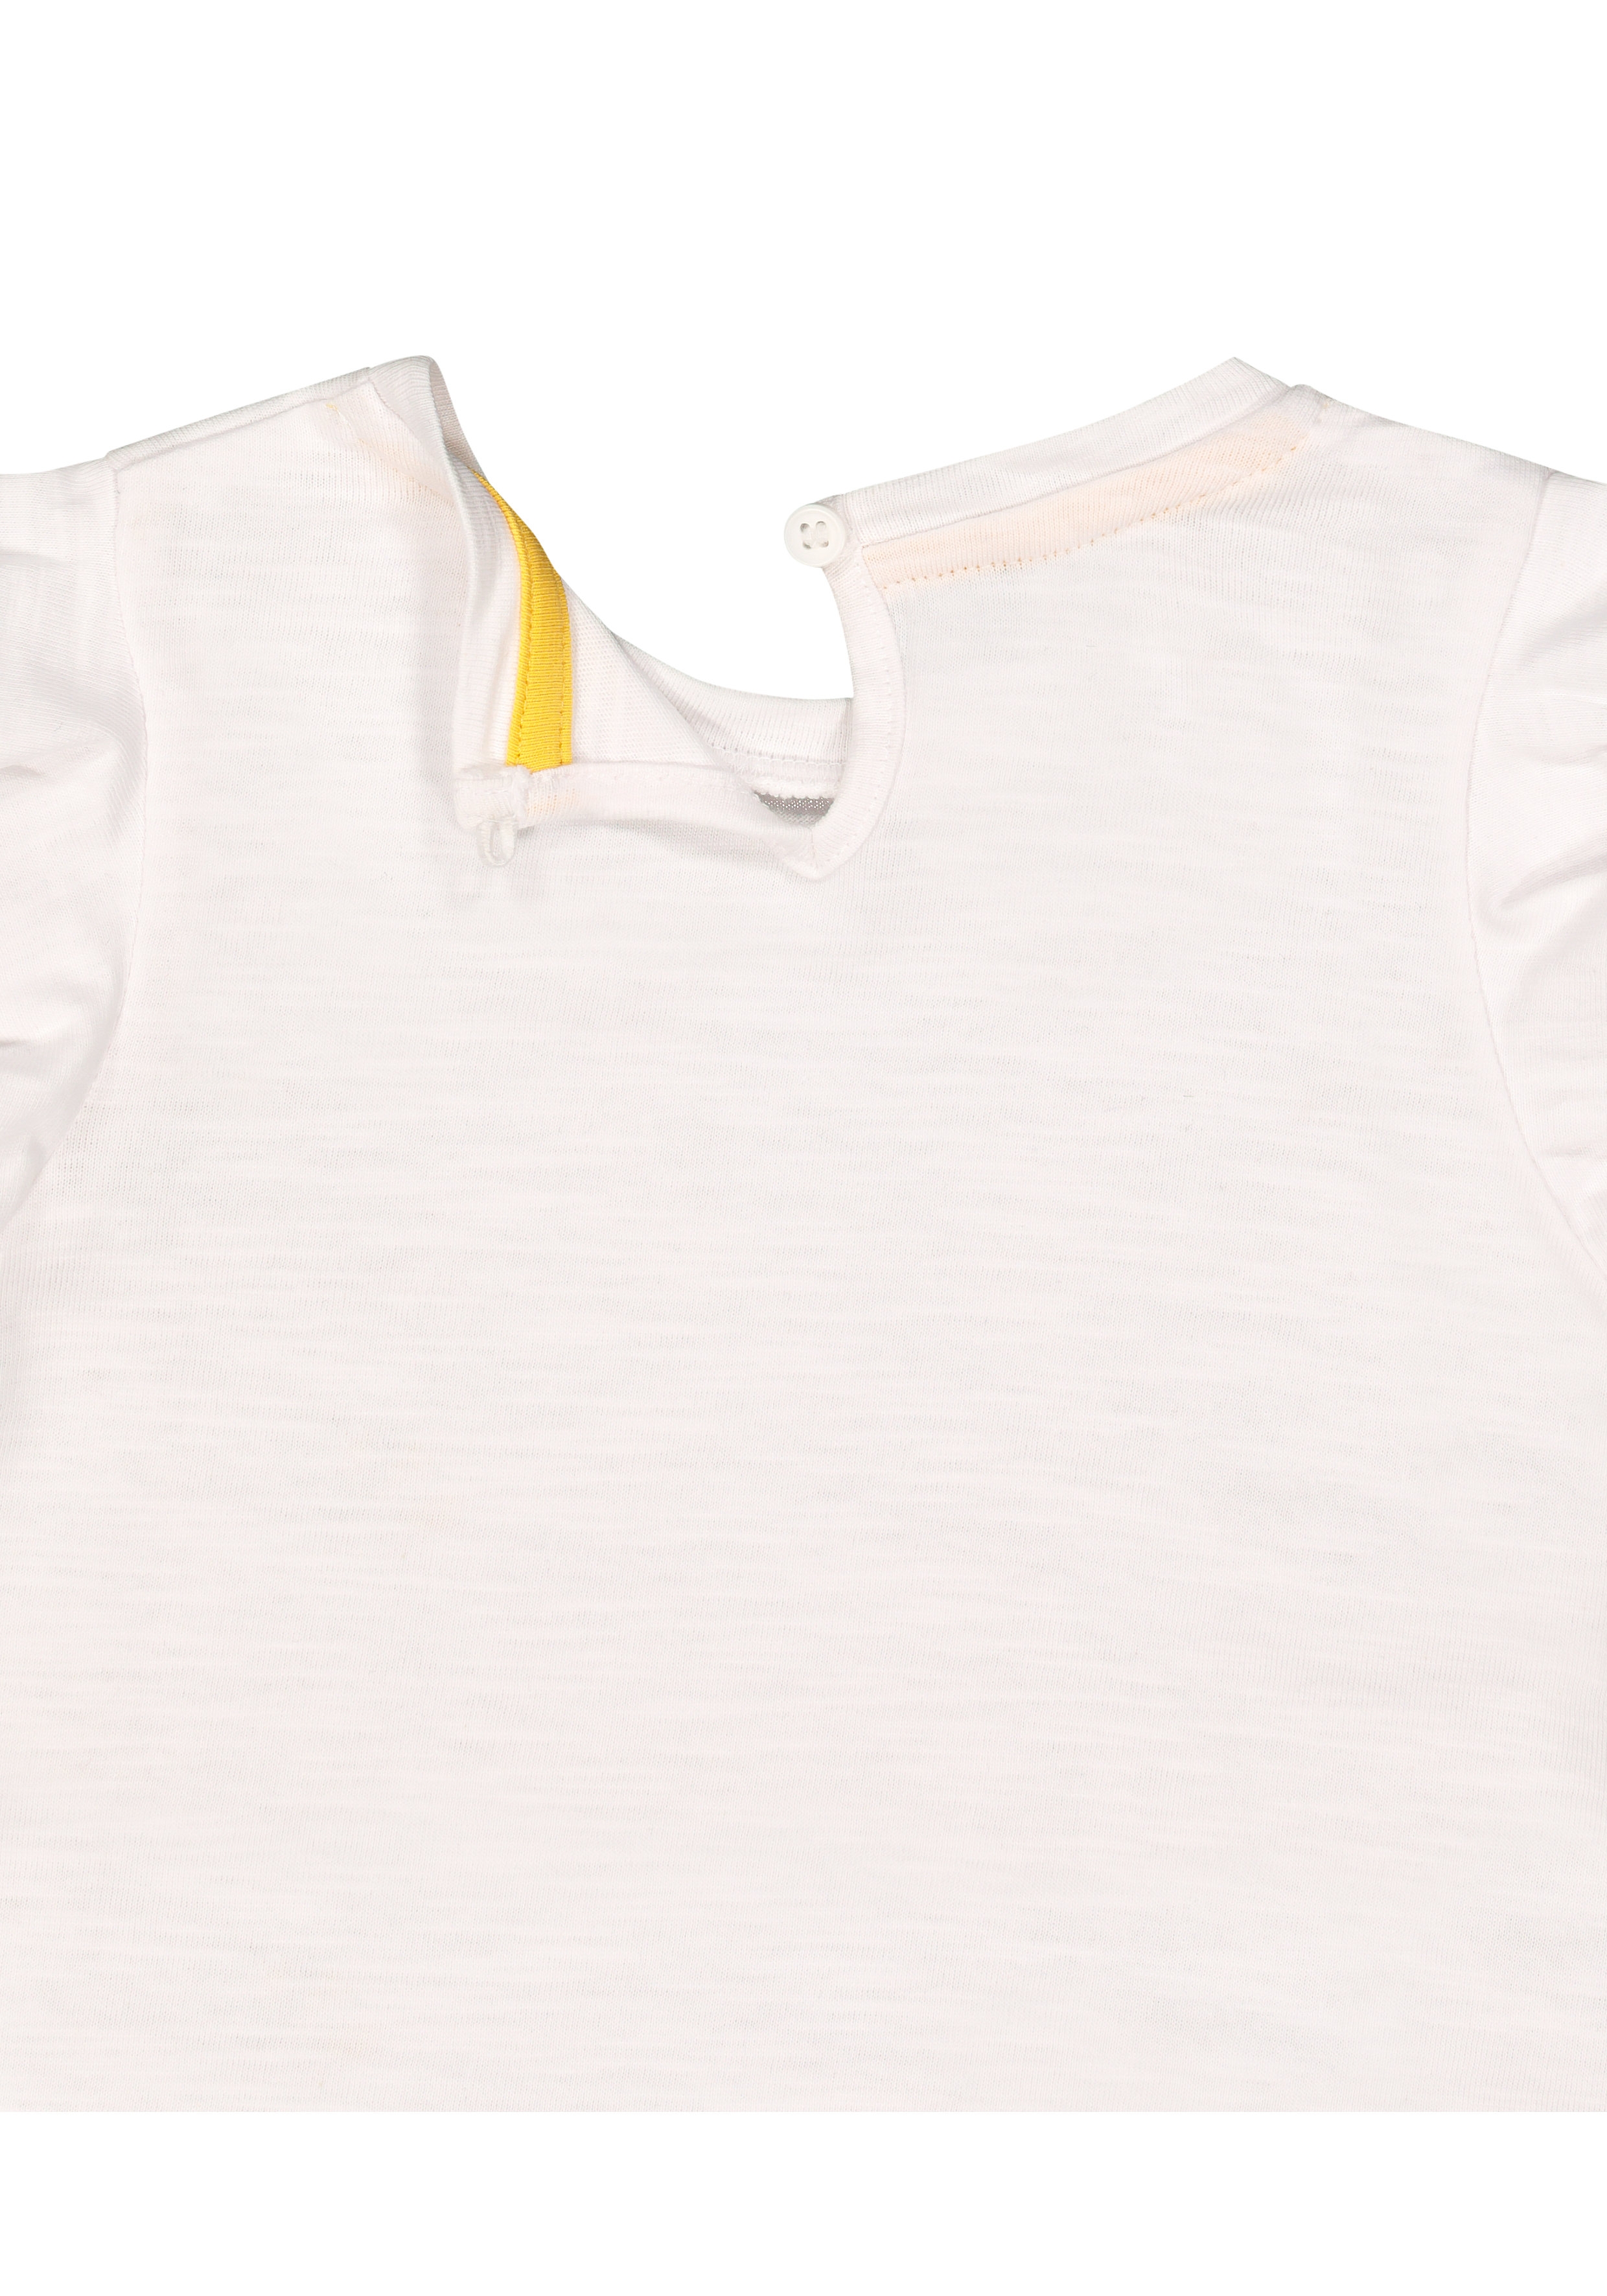 Mothercare | Girls Full Sleeves T-Shirt Sparkly Bee Print - White 2